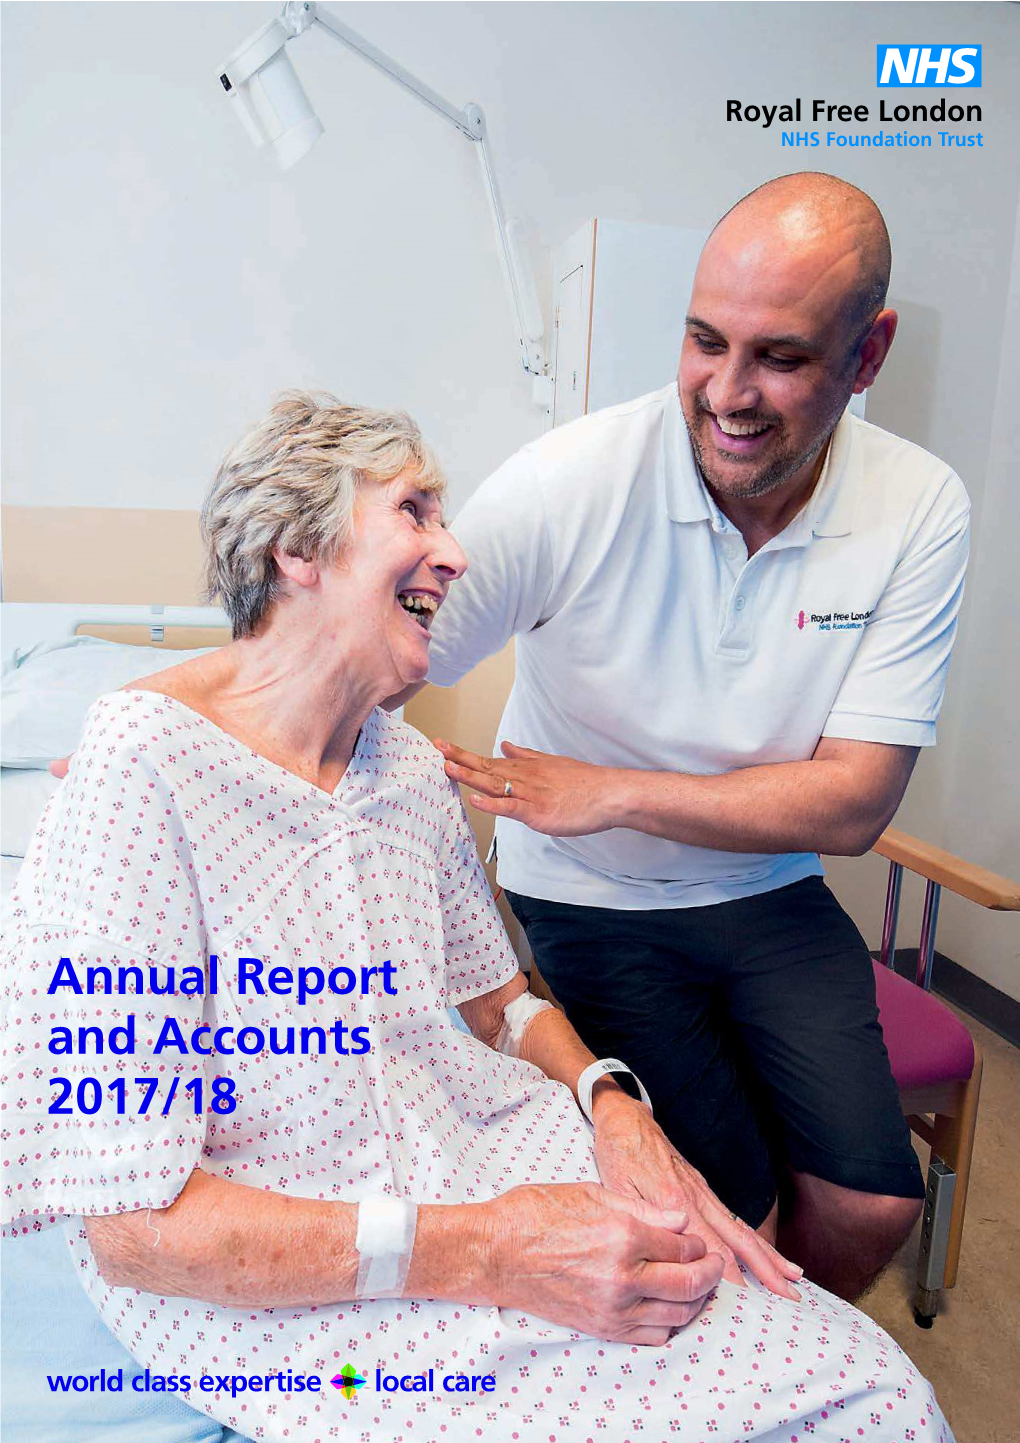 Royal Free London NHS Foundation Trust: Annual Report and Accounts